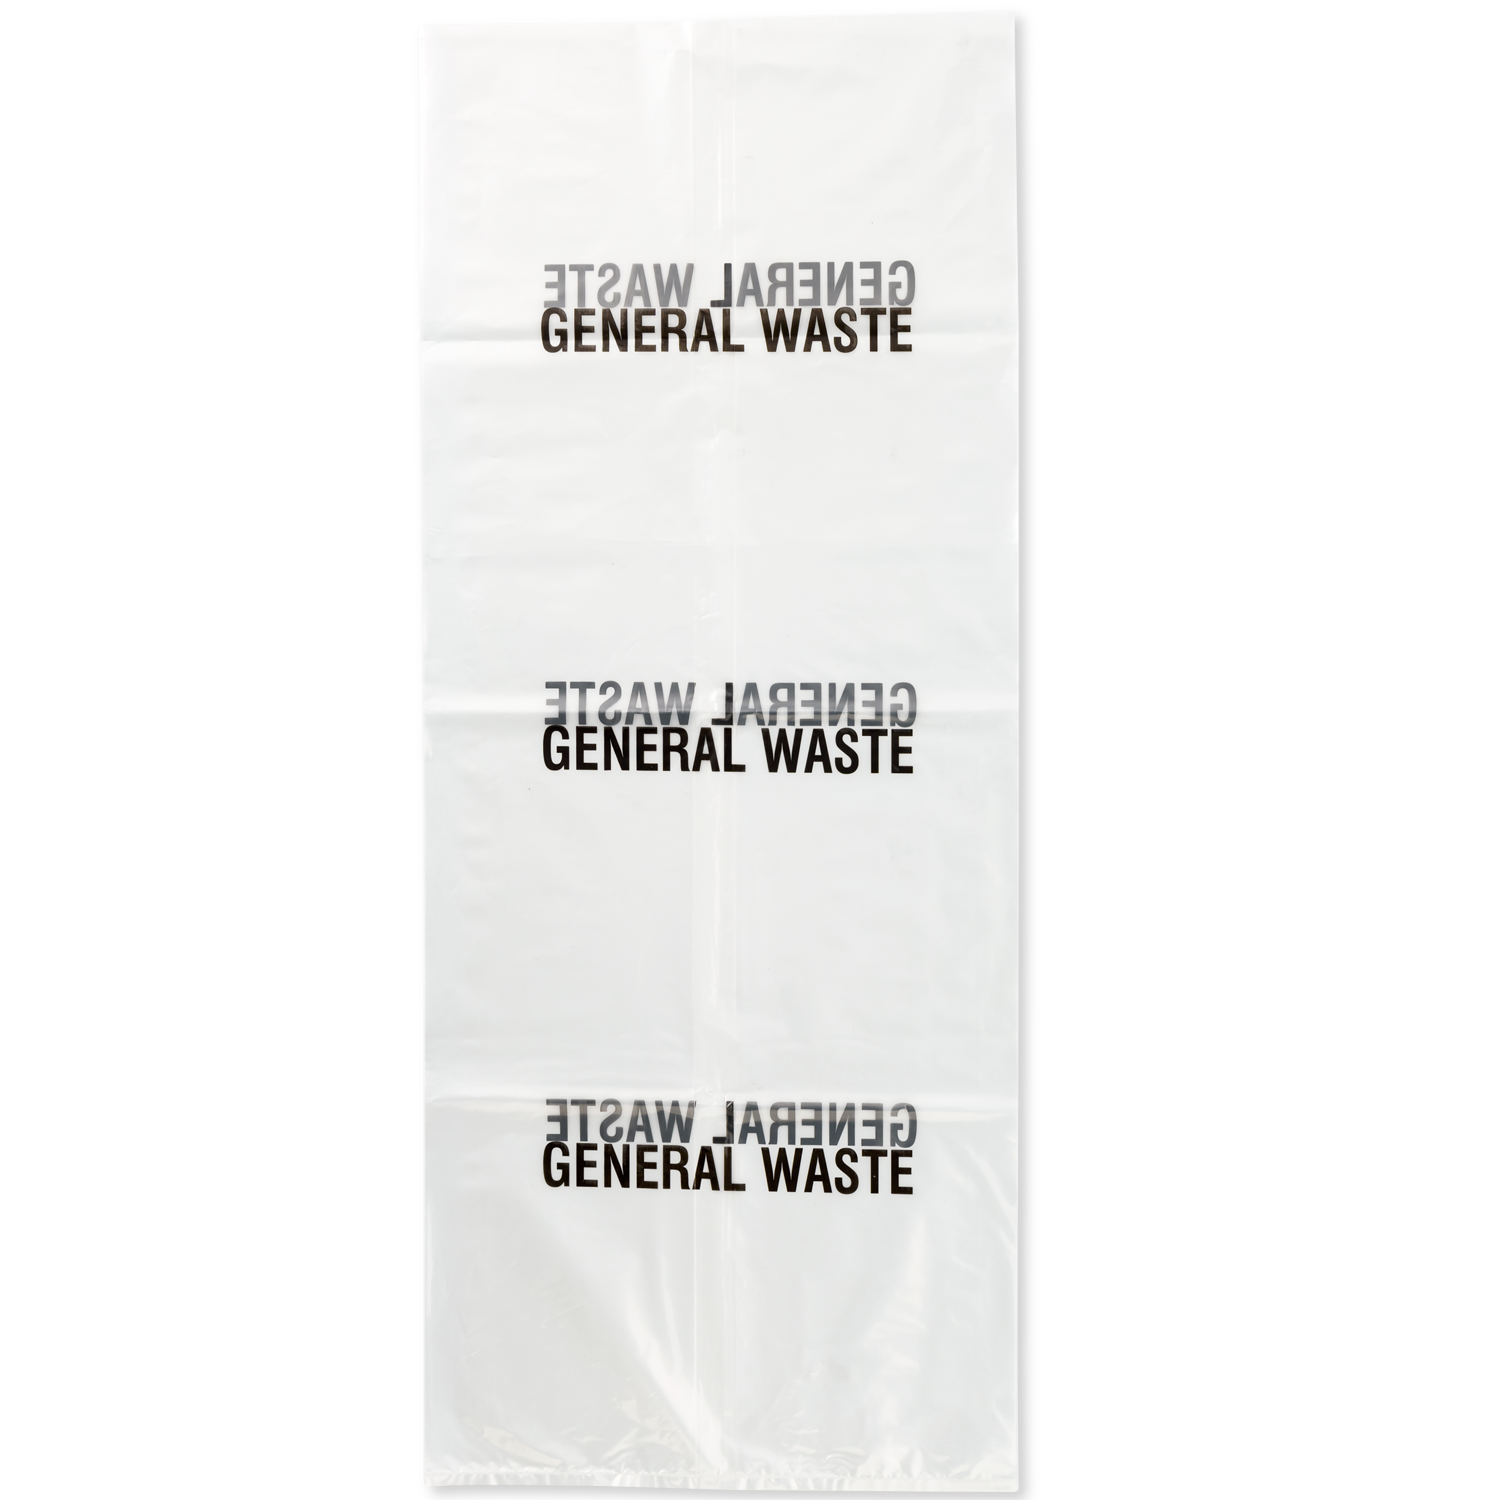 CLEAR LOW DENSITY GUSETTED POLY BAGS PRINTED GENERAL WASTE